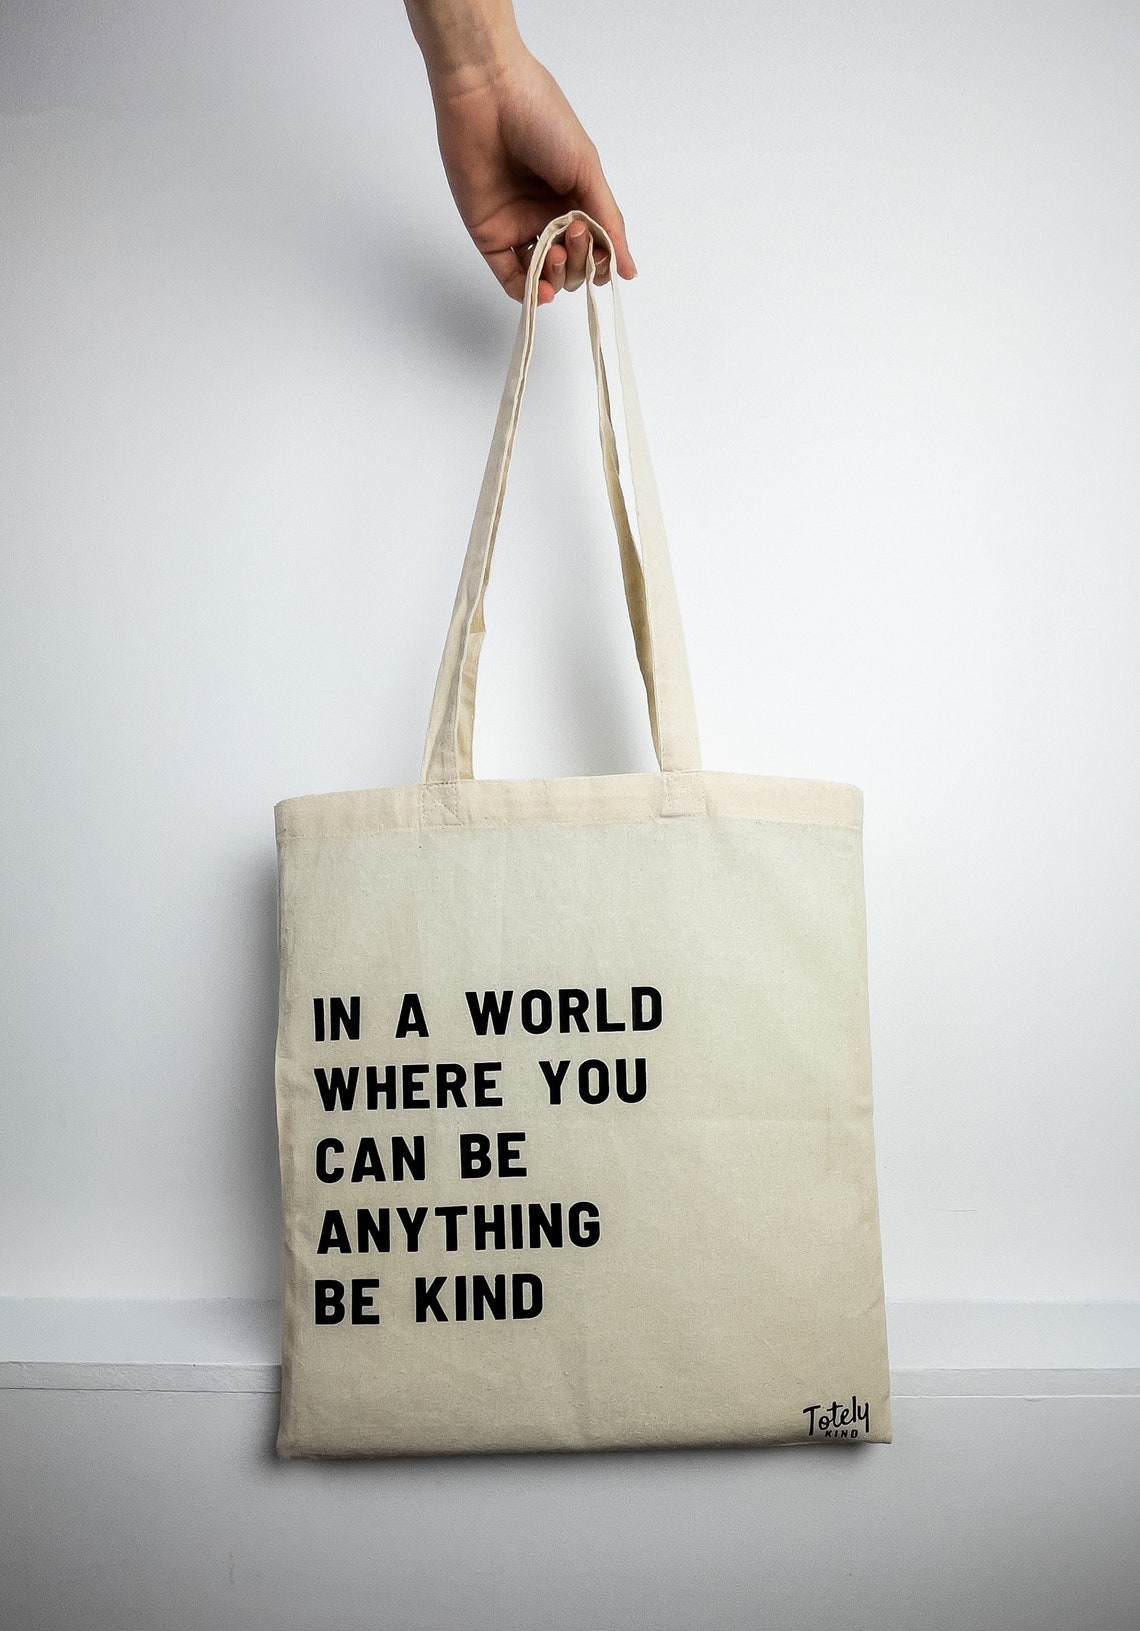 Be Kind Tote Bag 100% Cotton Spread Kindness Tote Bag - Etsy